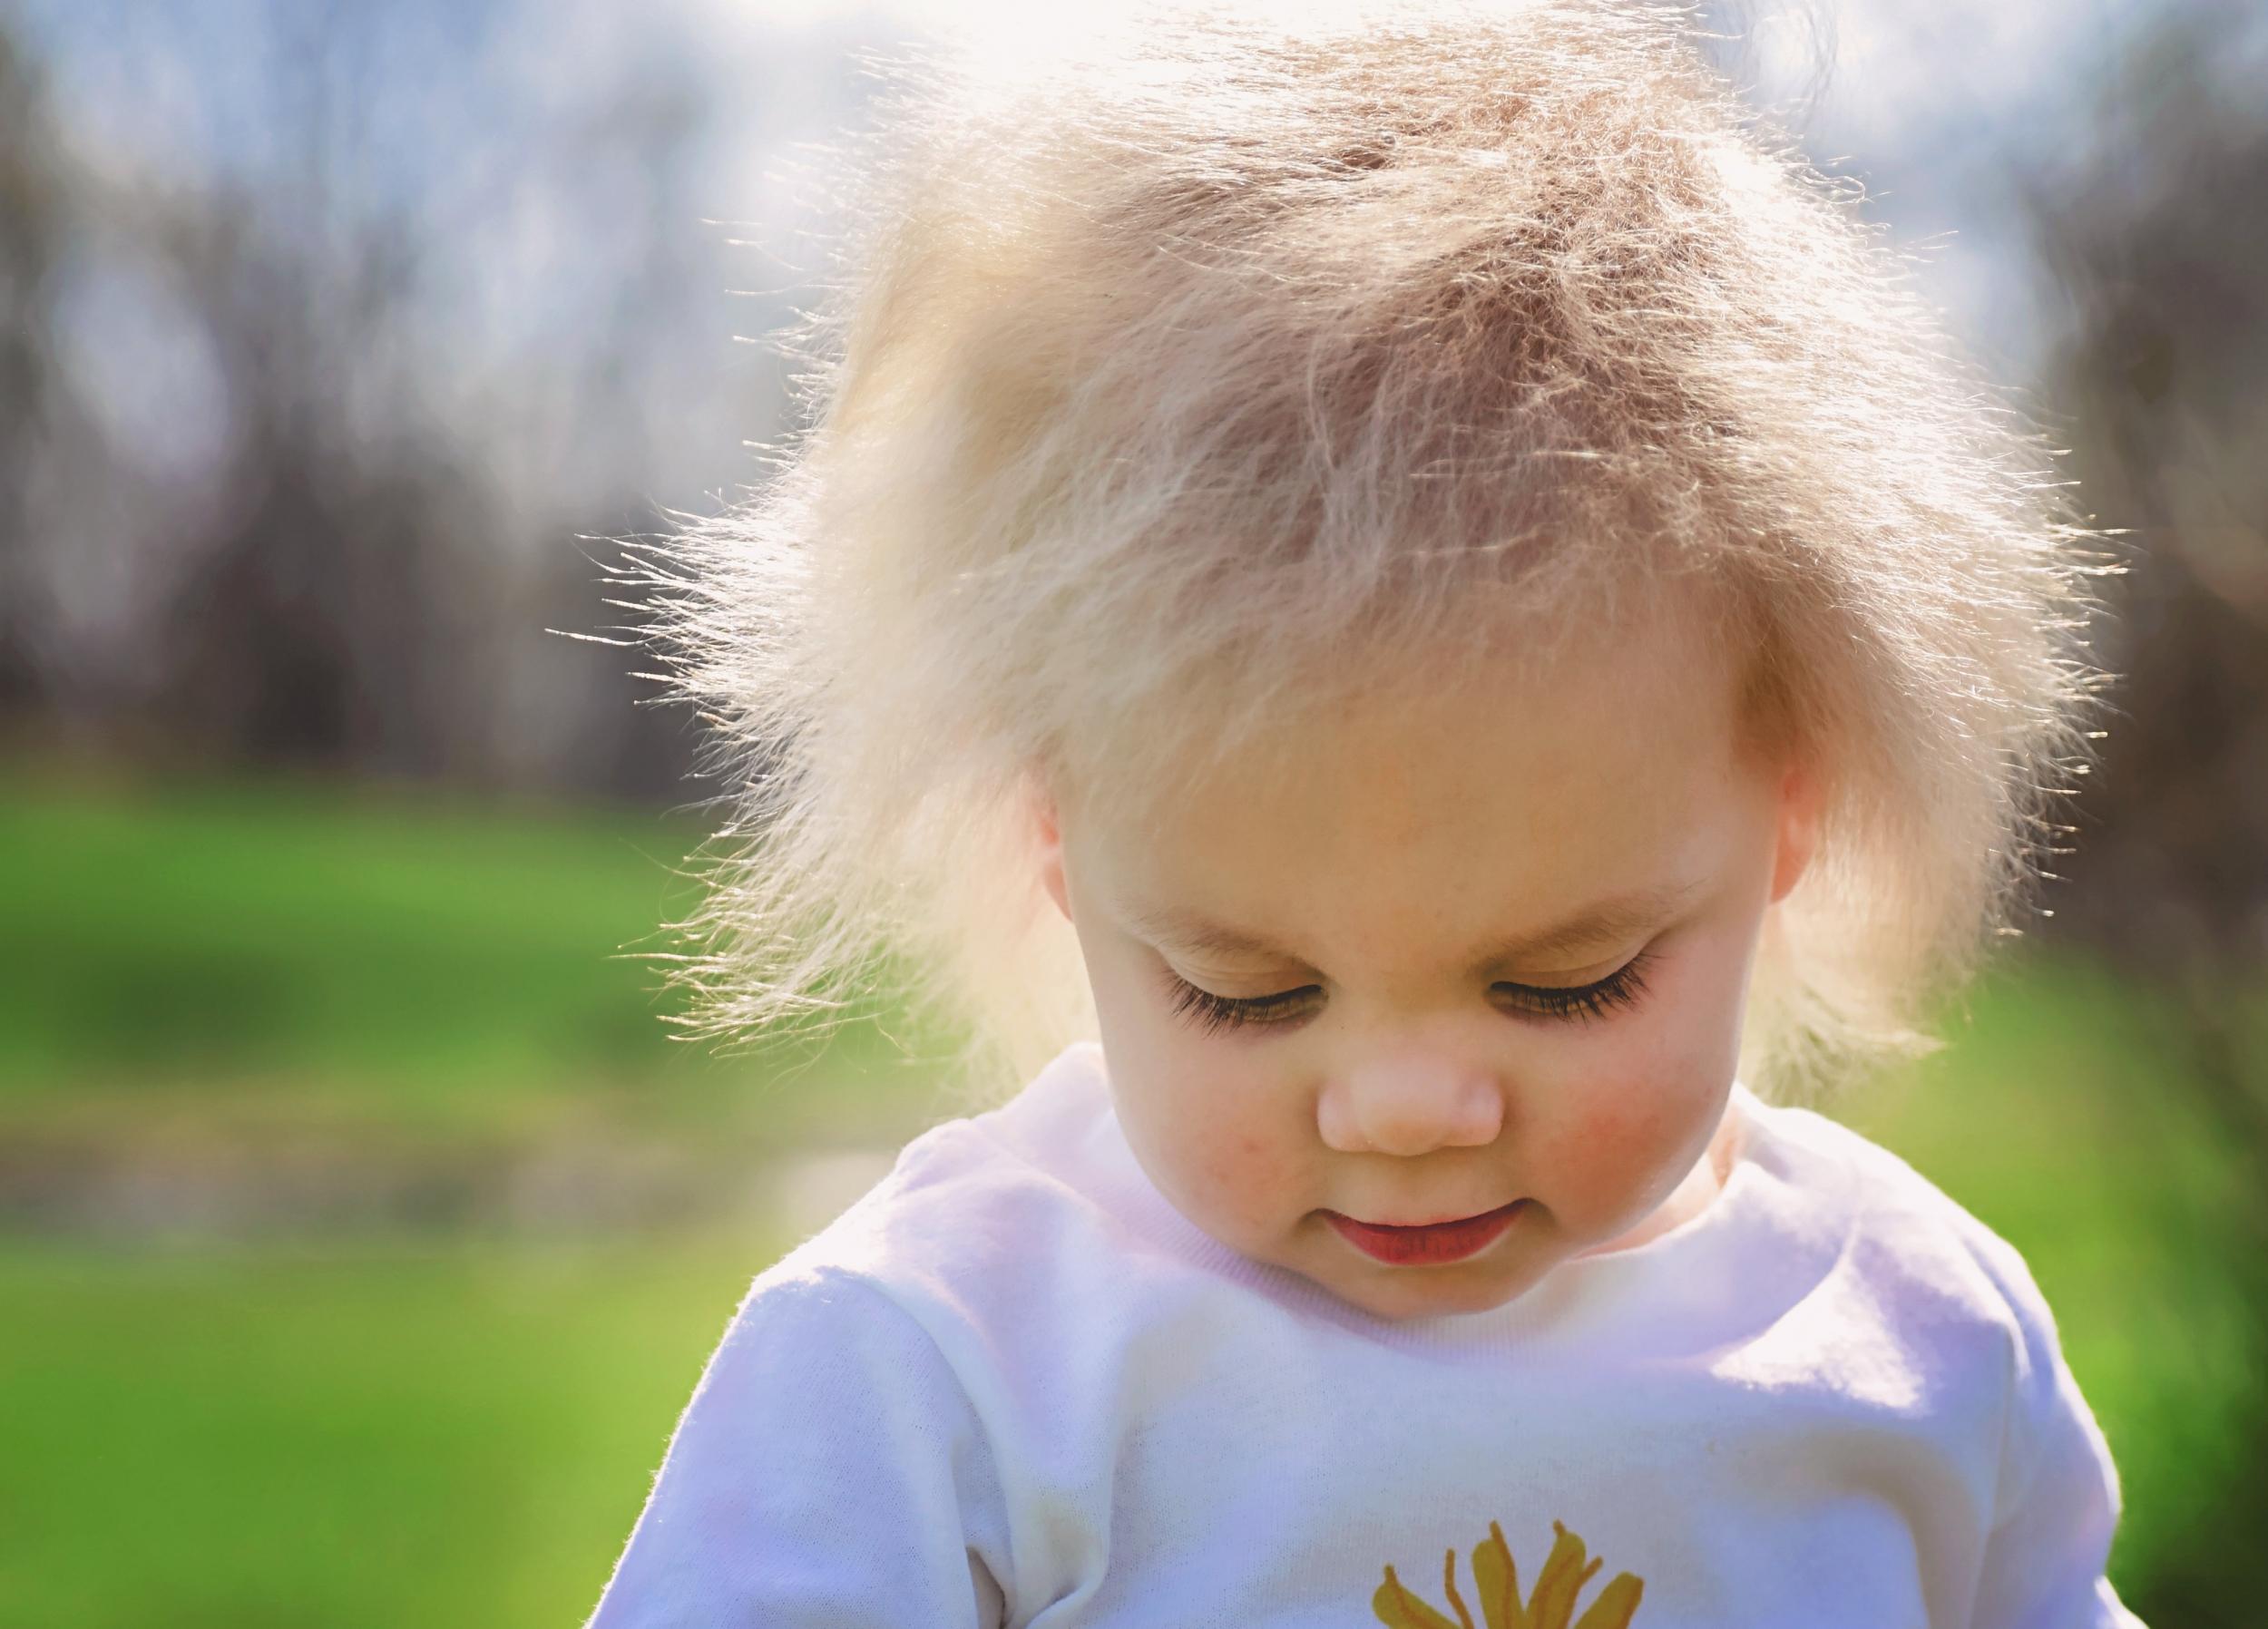 There are around 100 reported cases of 'Uncombable Hair Syndrome' from around the world